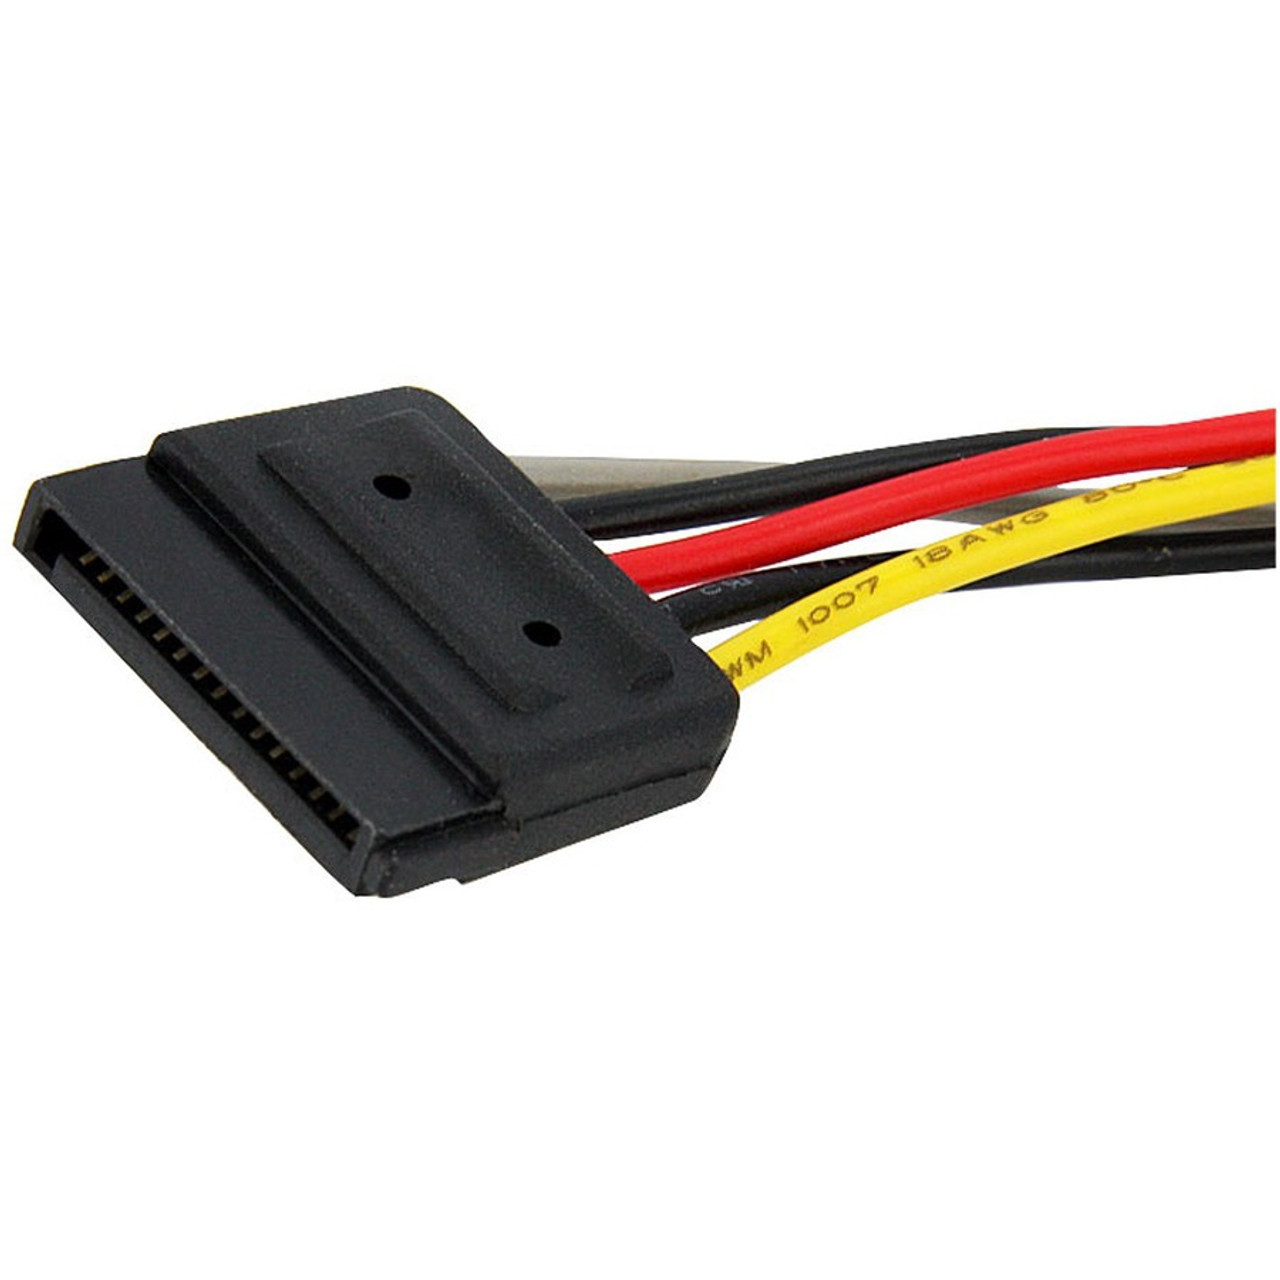 6in Sata Power Y Splitter Cable Adapter - 6" - Startech.com Pyo2sata - image 2 of 3